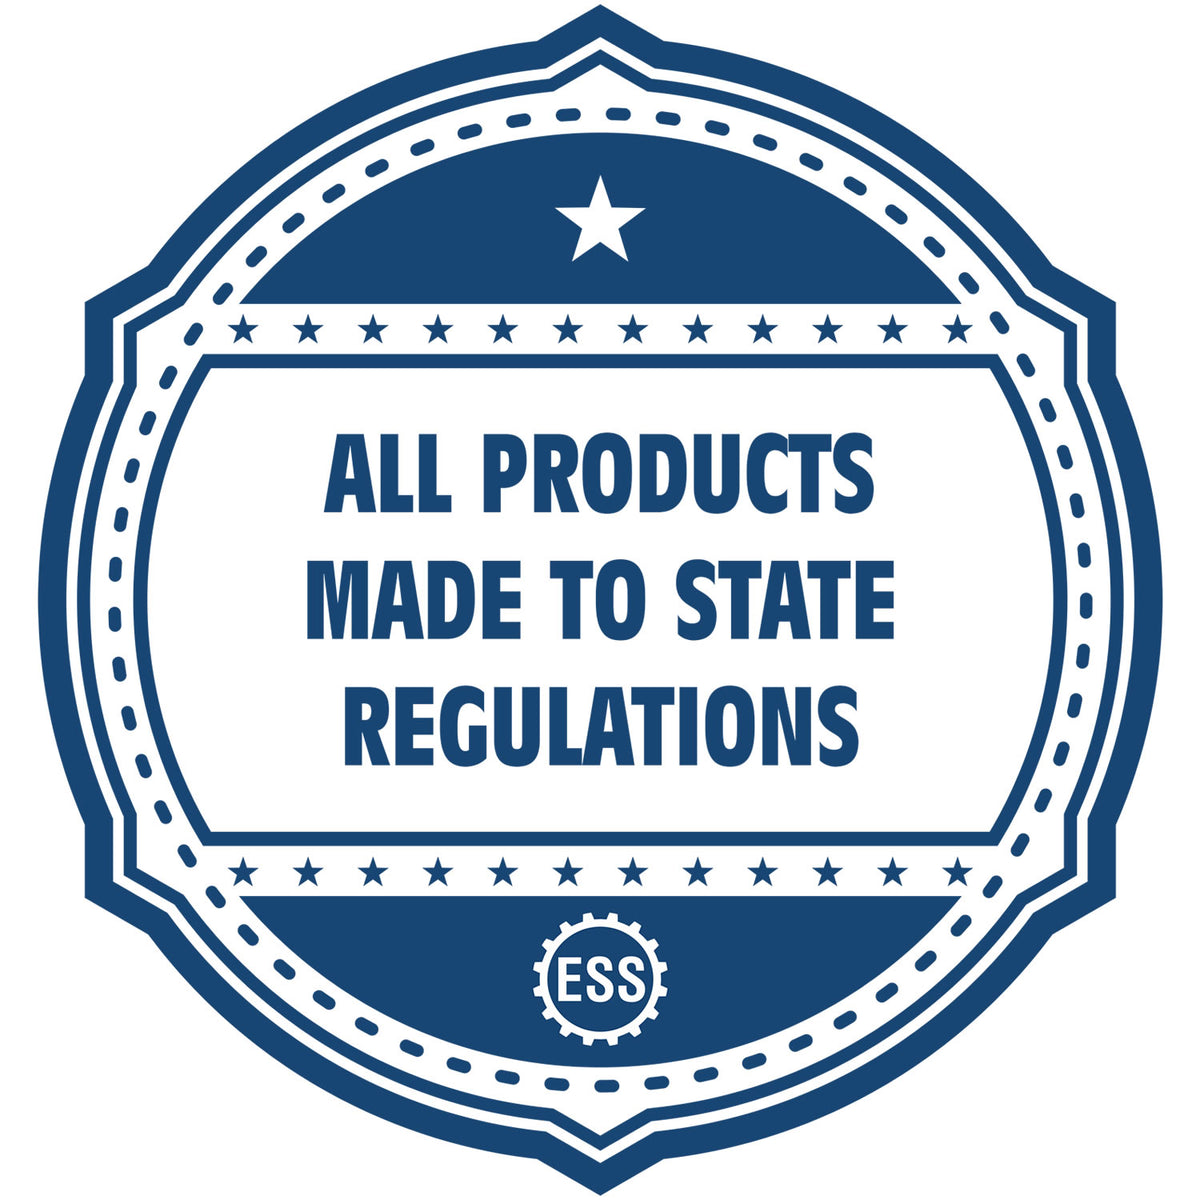 An icon or badge element for the Long Reach Michigan Land Surveyor Seal showing that this product is made in compliance with state regulations.